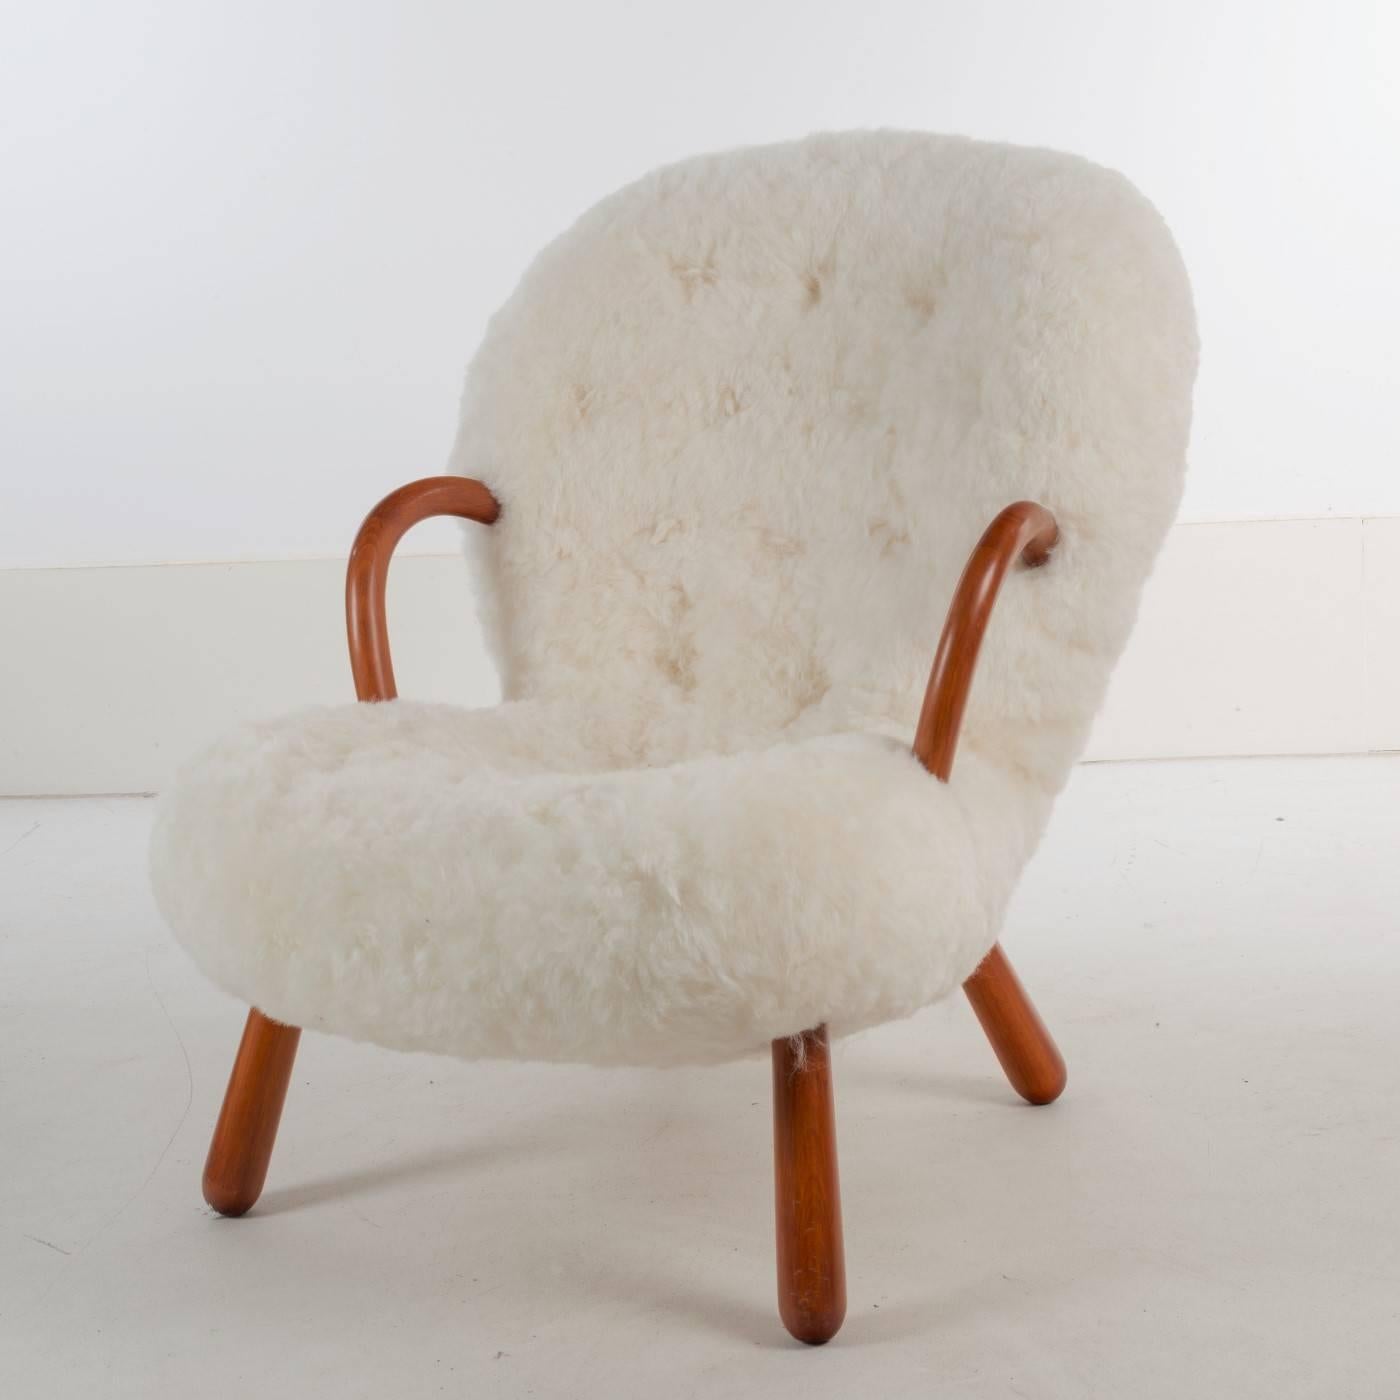 Pair of 'Clam' armchairs designed by the Danish architect Philip Arctander (1916-1994) with arms and legs of polished beech and reupholstered in shorn sheepskin. Designed in 1944 and produced in the late 1940s by Nordisk Staal & Møbel Central.